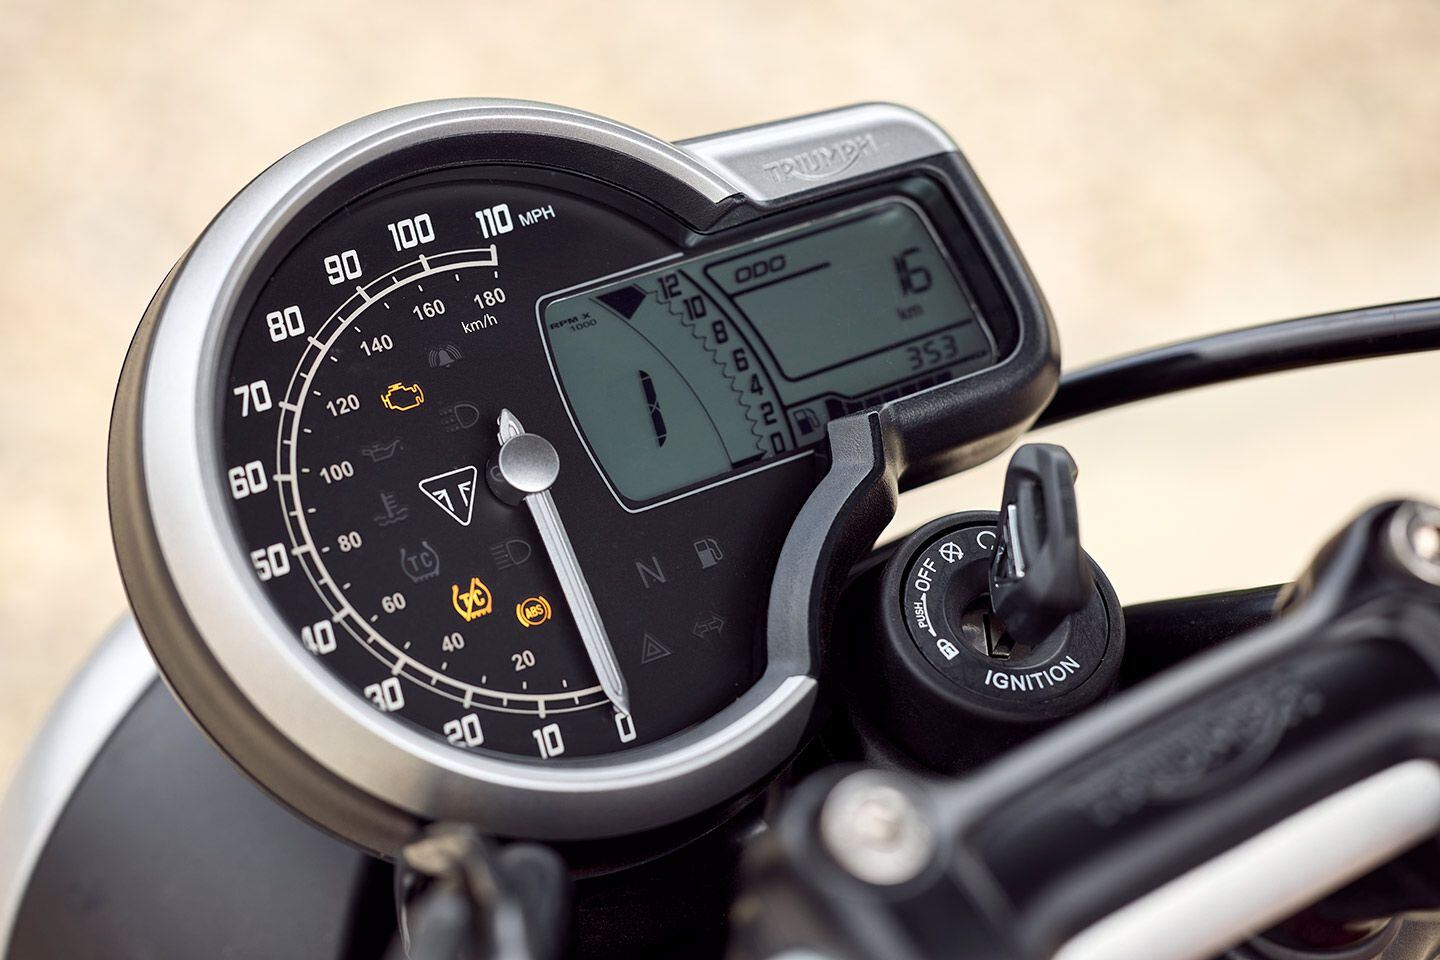 Simple analog speedometer and LCD display does the trick for both Triumph Speed 400 and Scrambler 400 X.